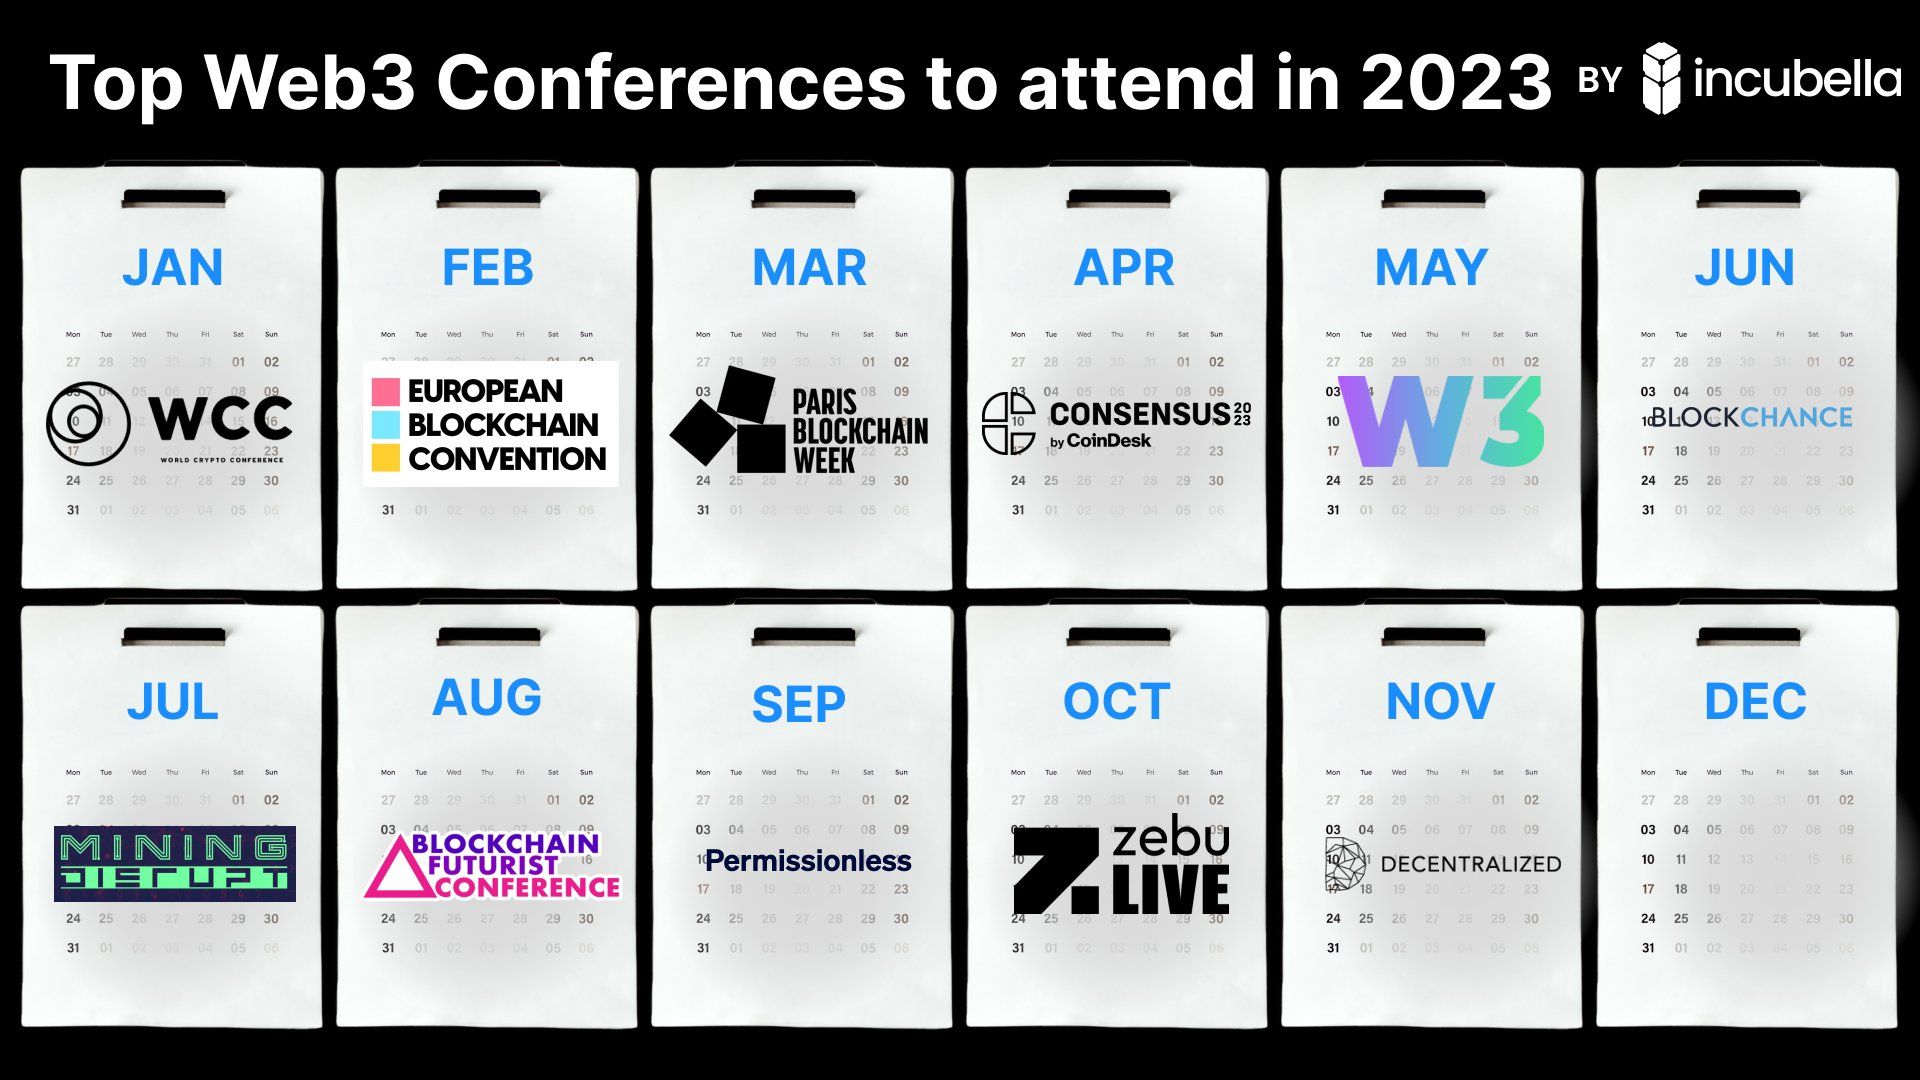 Top Web3 Conferences to Attend in 2023